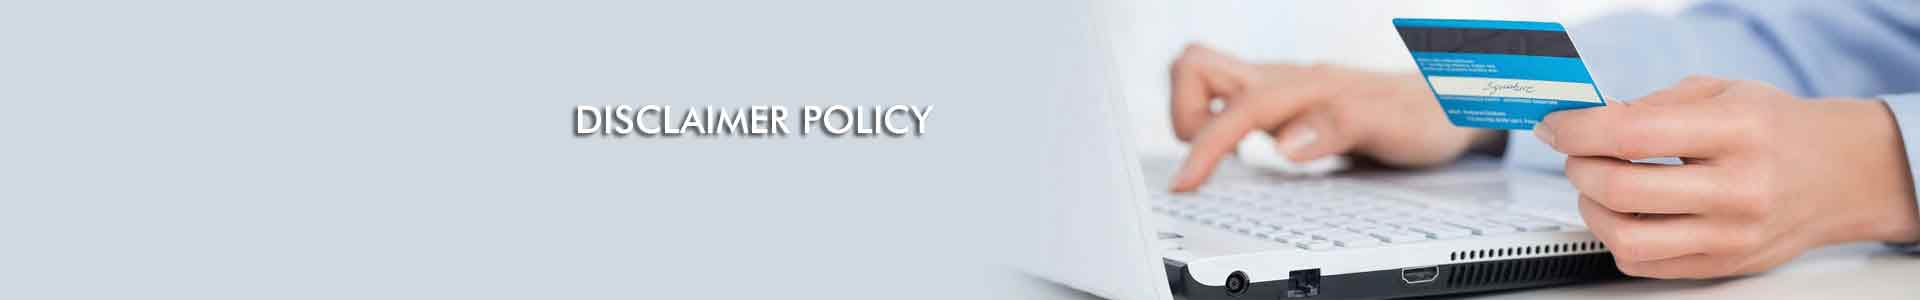 Vision India Disclaimer Policy